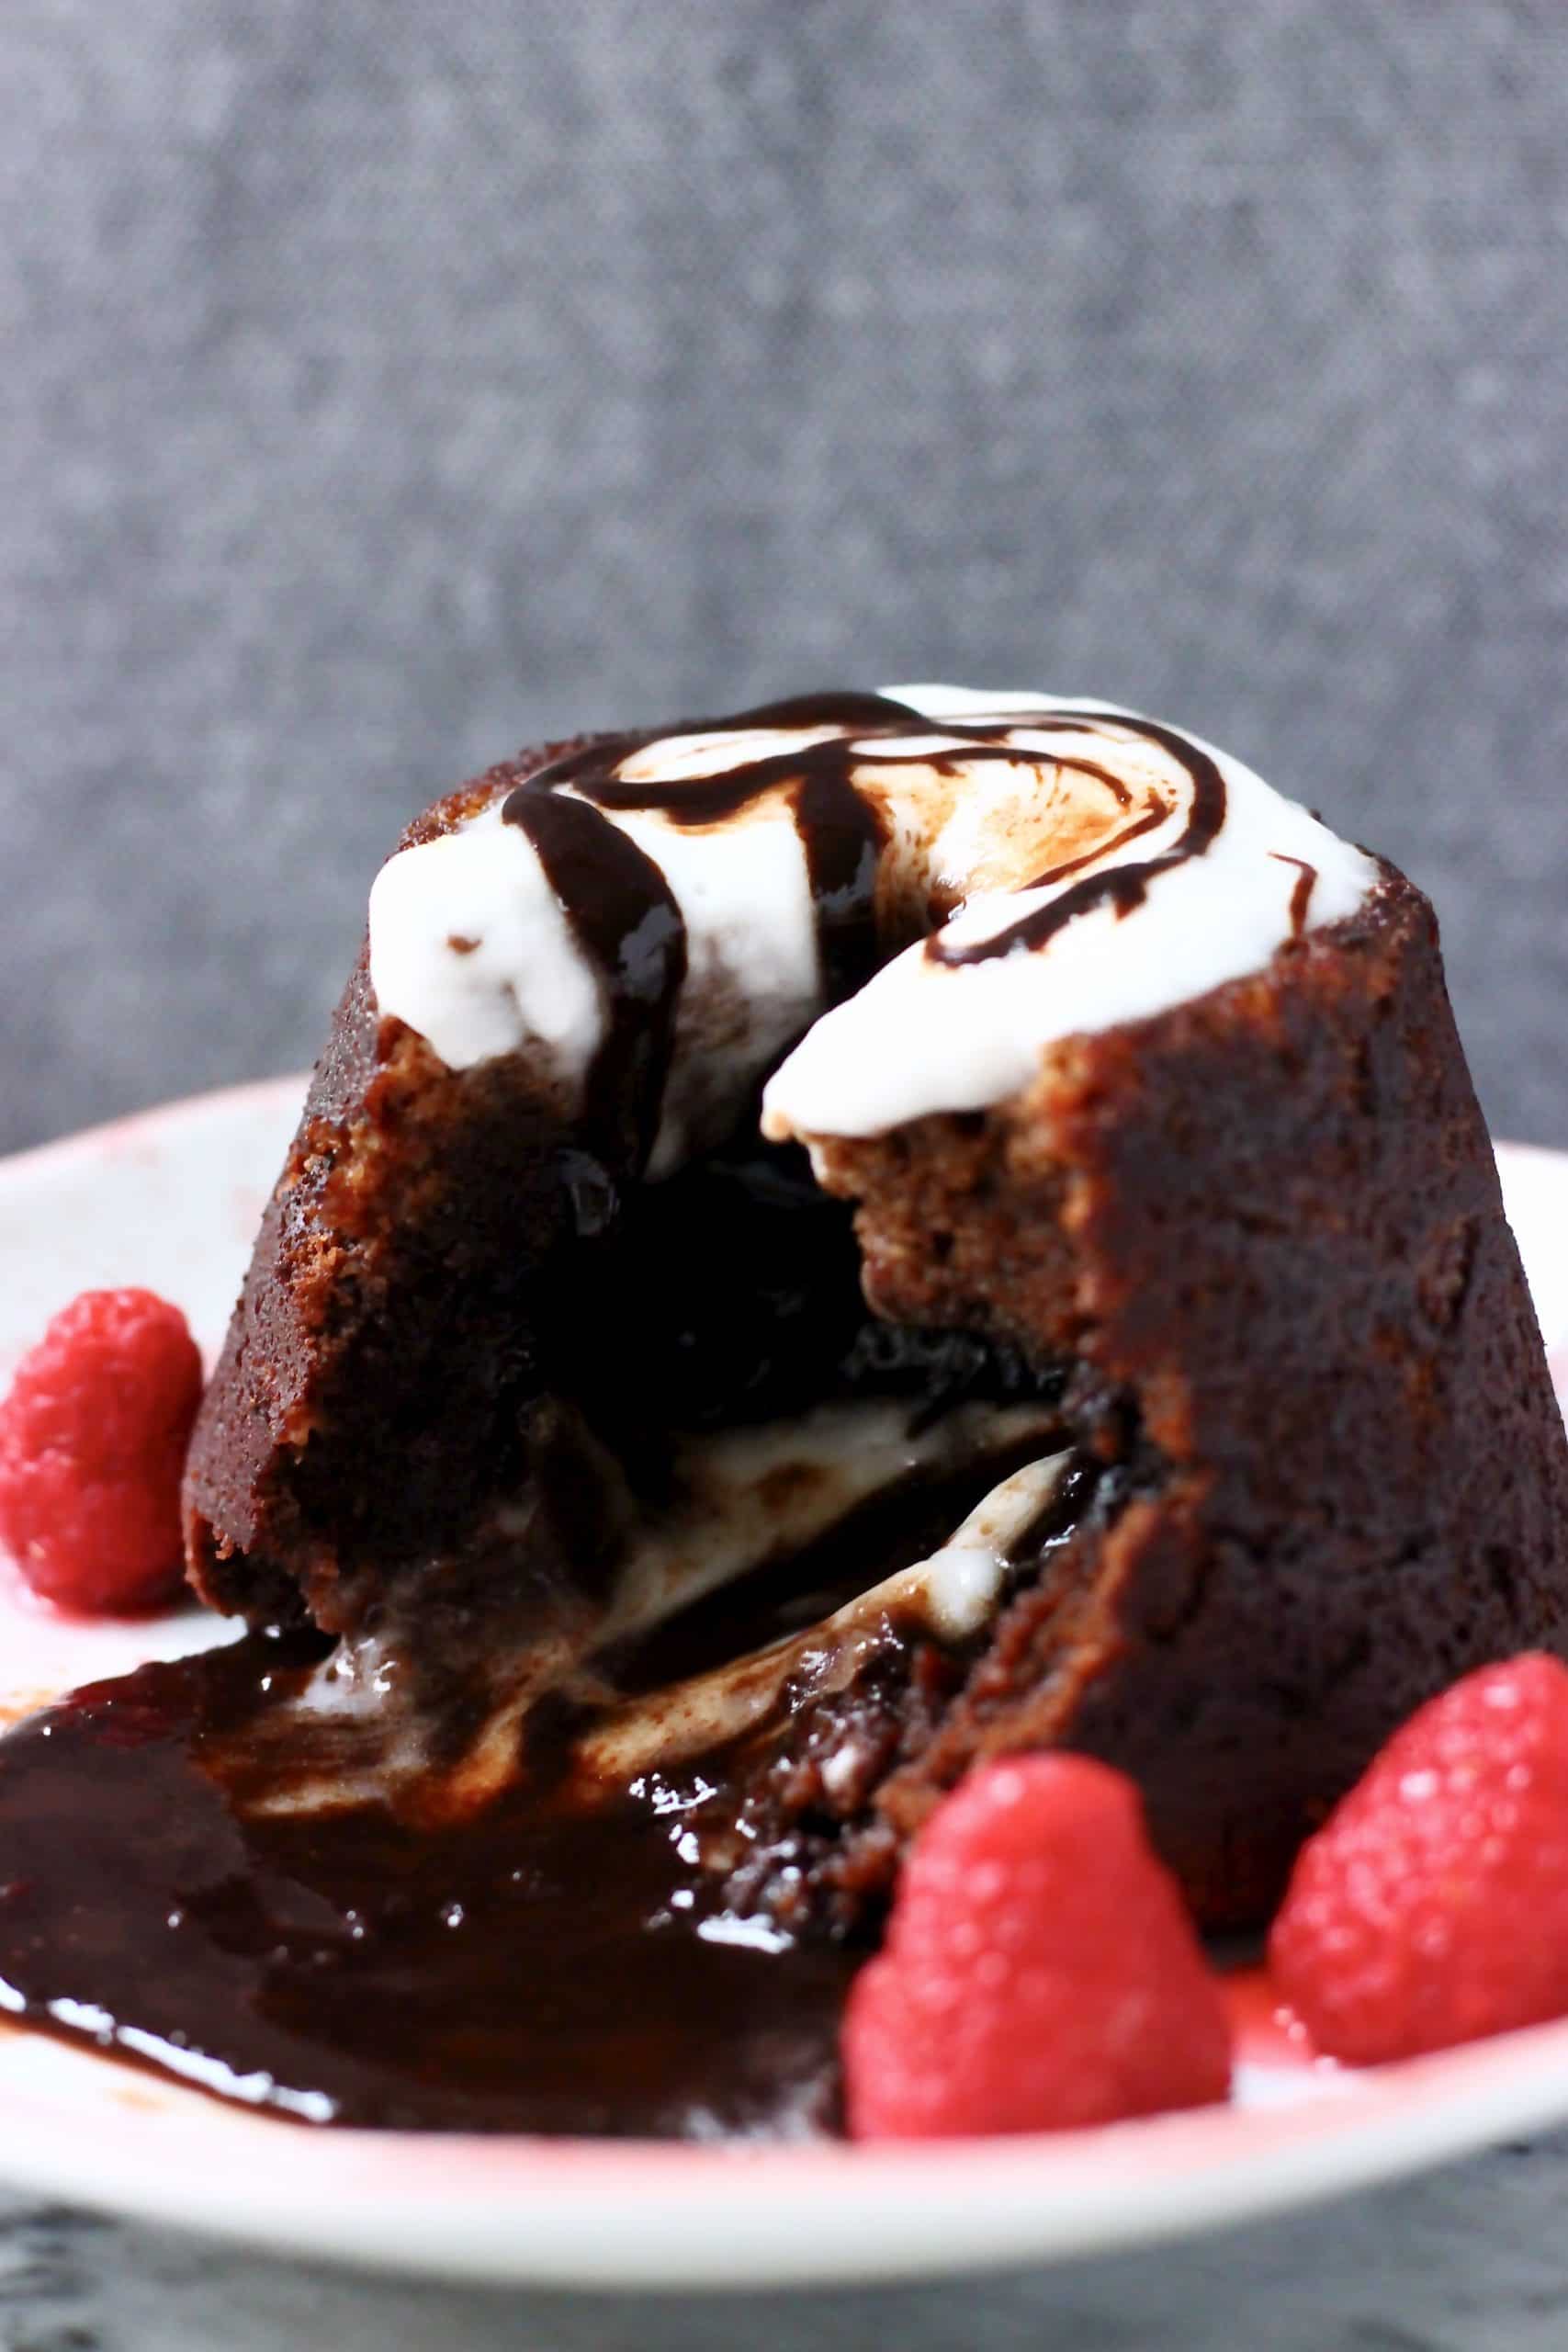 Chocolate lava cake on a plate with chocolate sauce flowing out of it topped with white cream and decorated with raspberries against a grey background